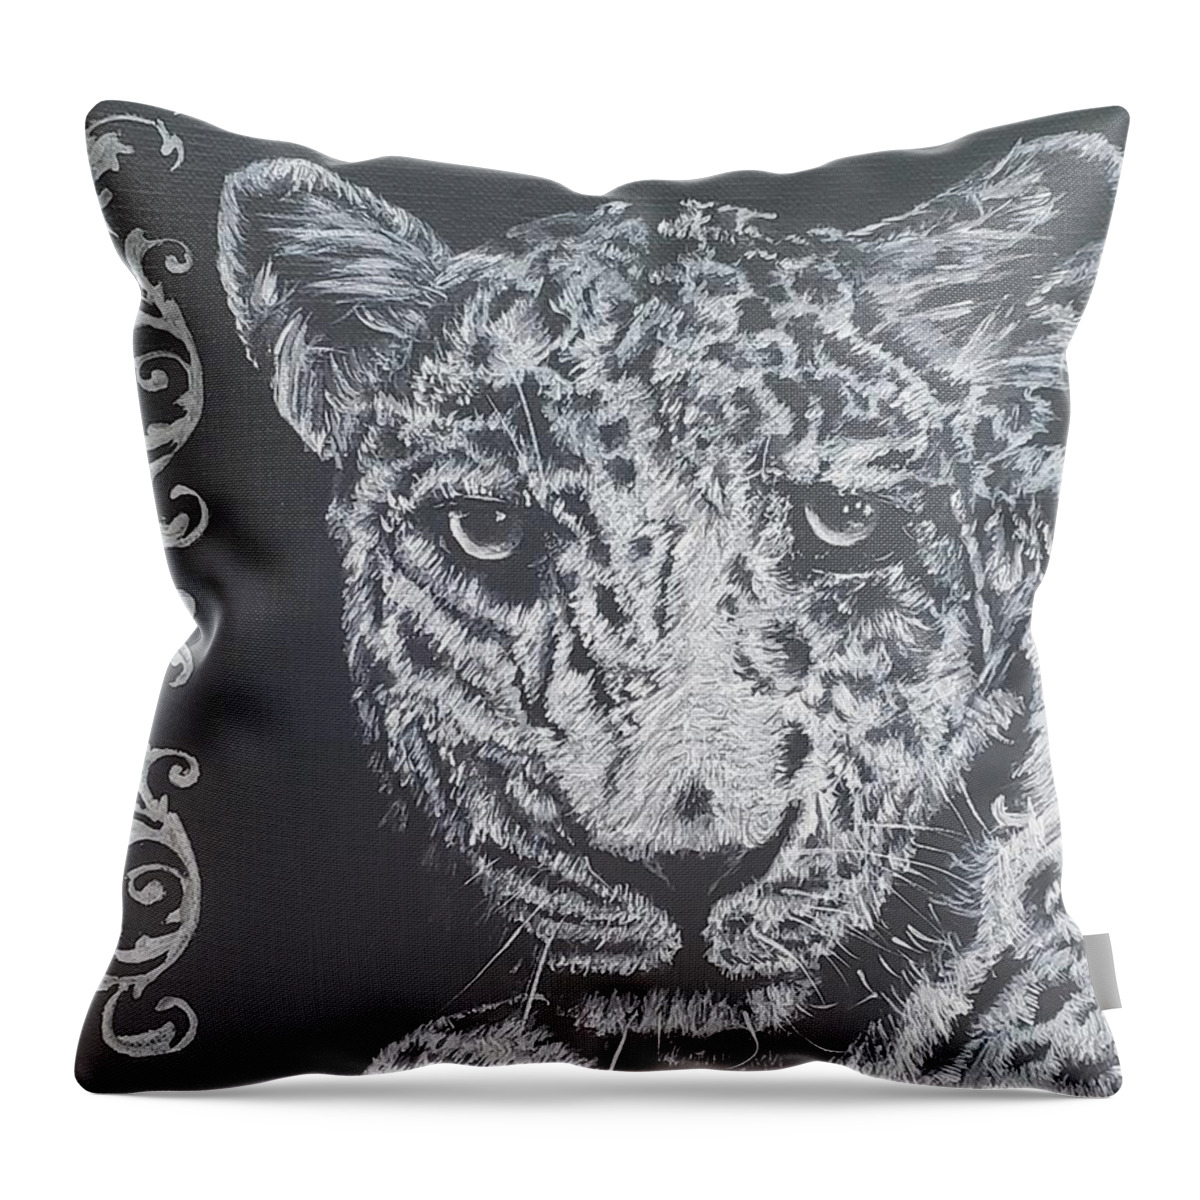 Snow Leopard Throw Pillow featuring the painting Snow Leopard by Michelle Stevens